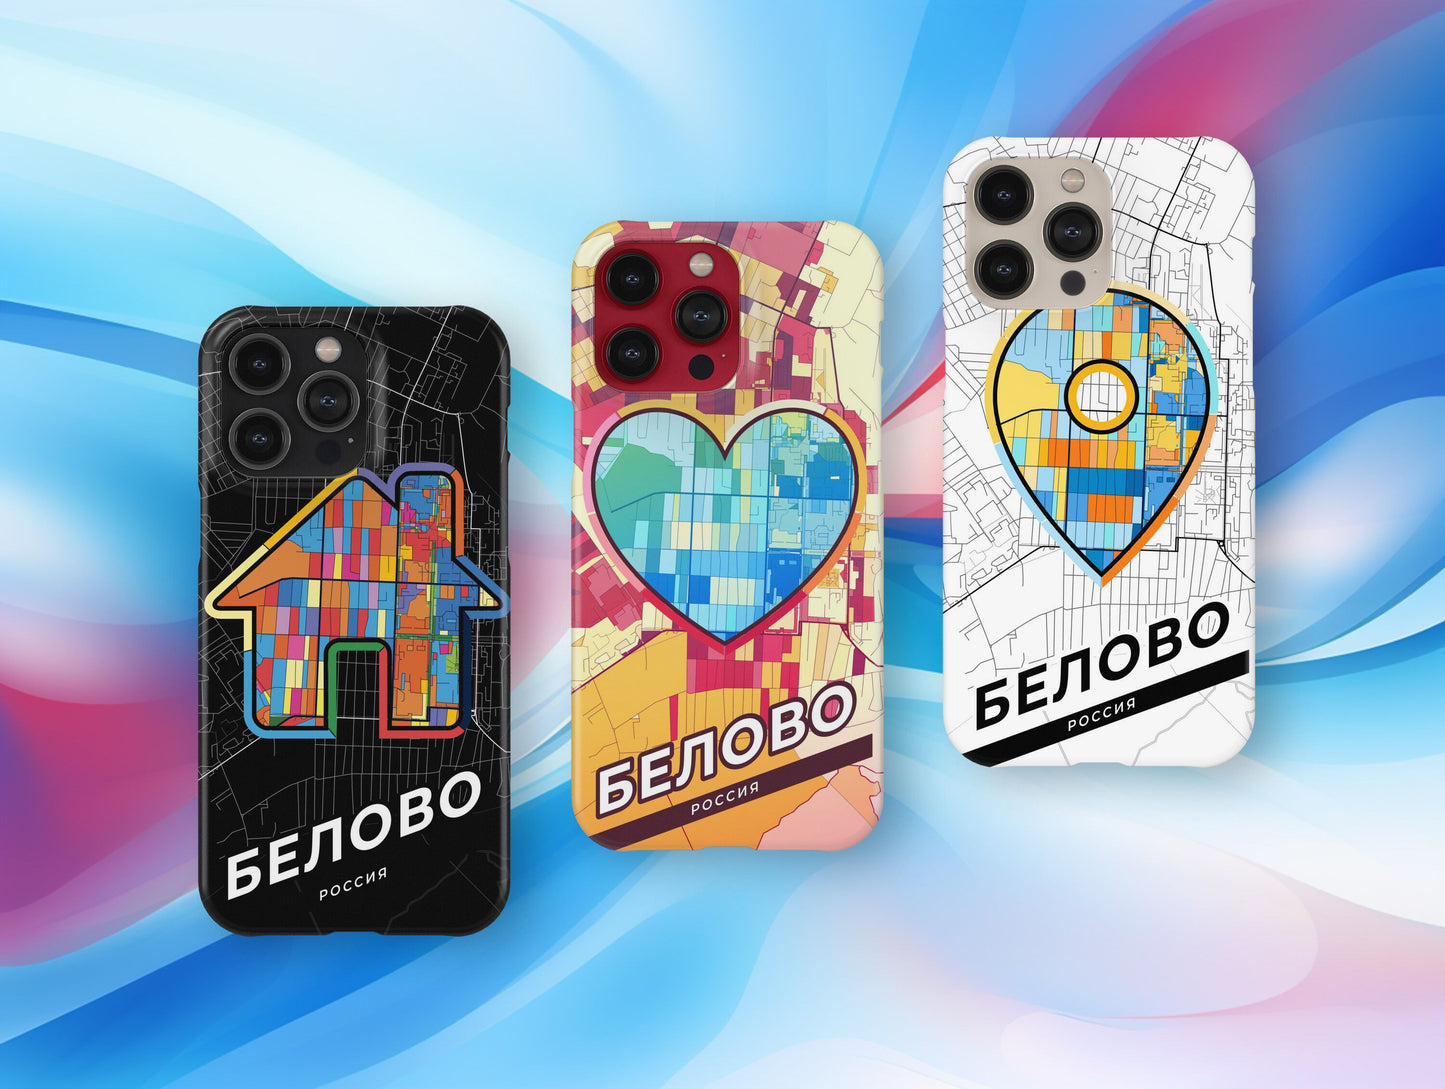 Belovo Russia slim phone case with colorful icon. Birthday, wedding or housewarming gift. Couple match cases.